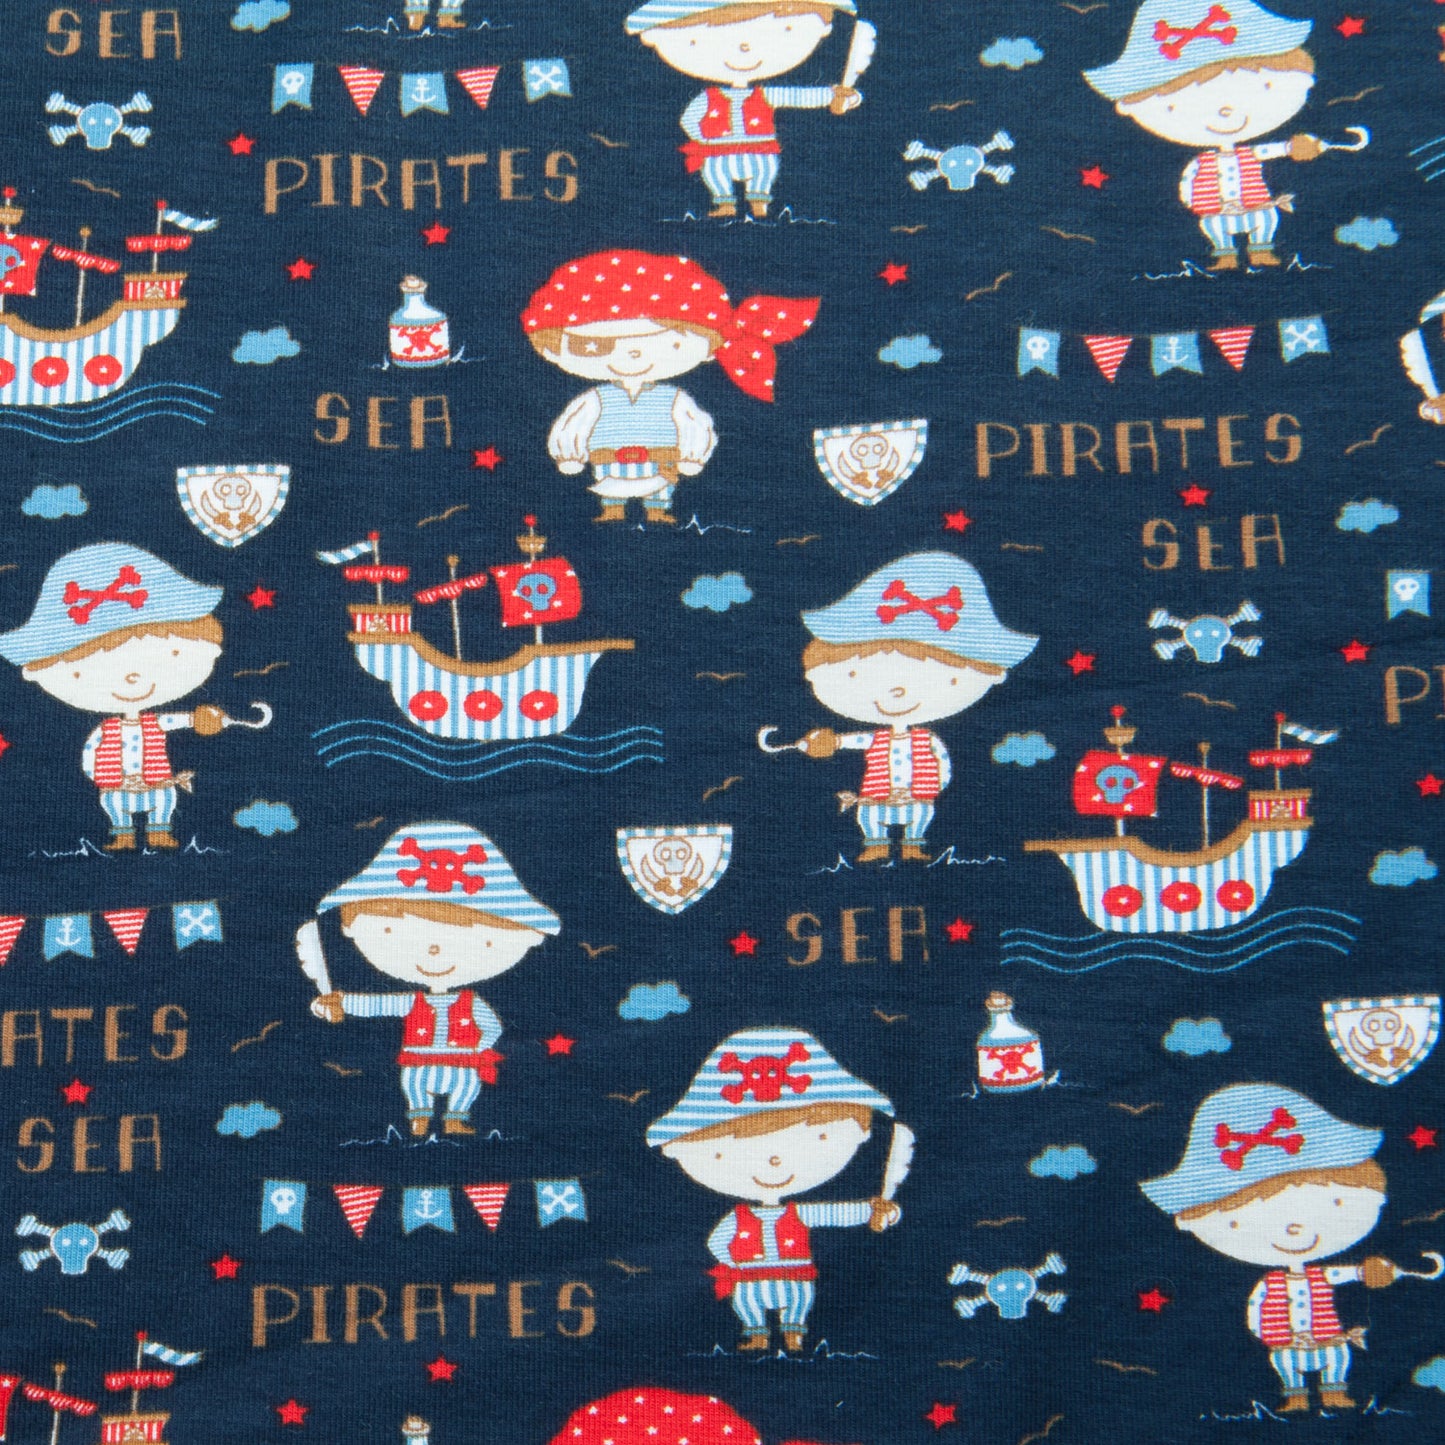 Sea Pirates Cotton Jersey in Navy